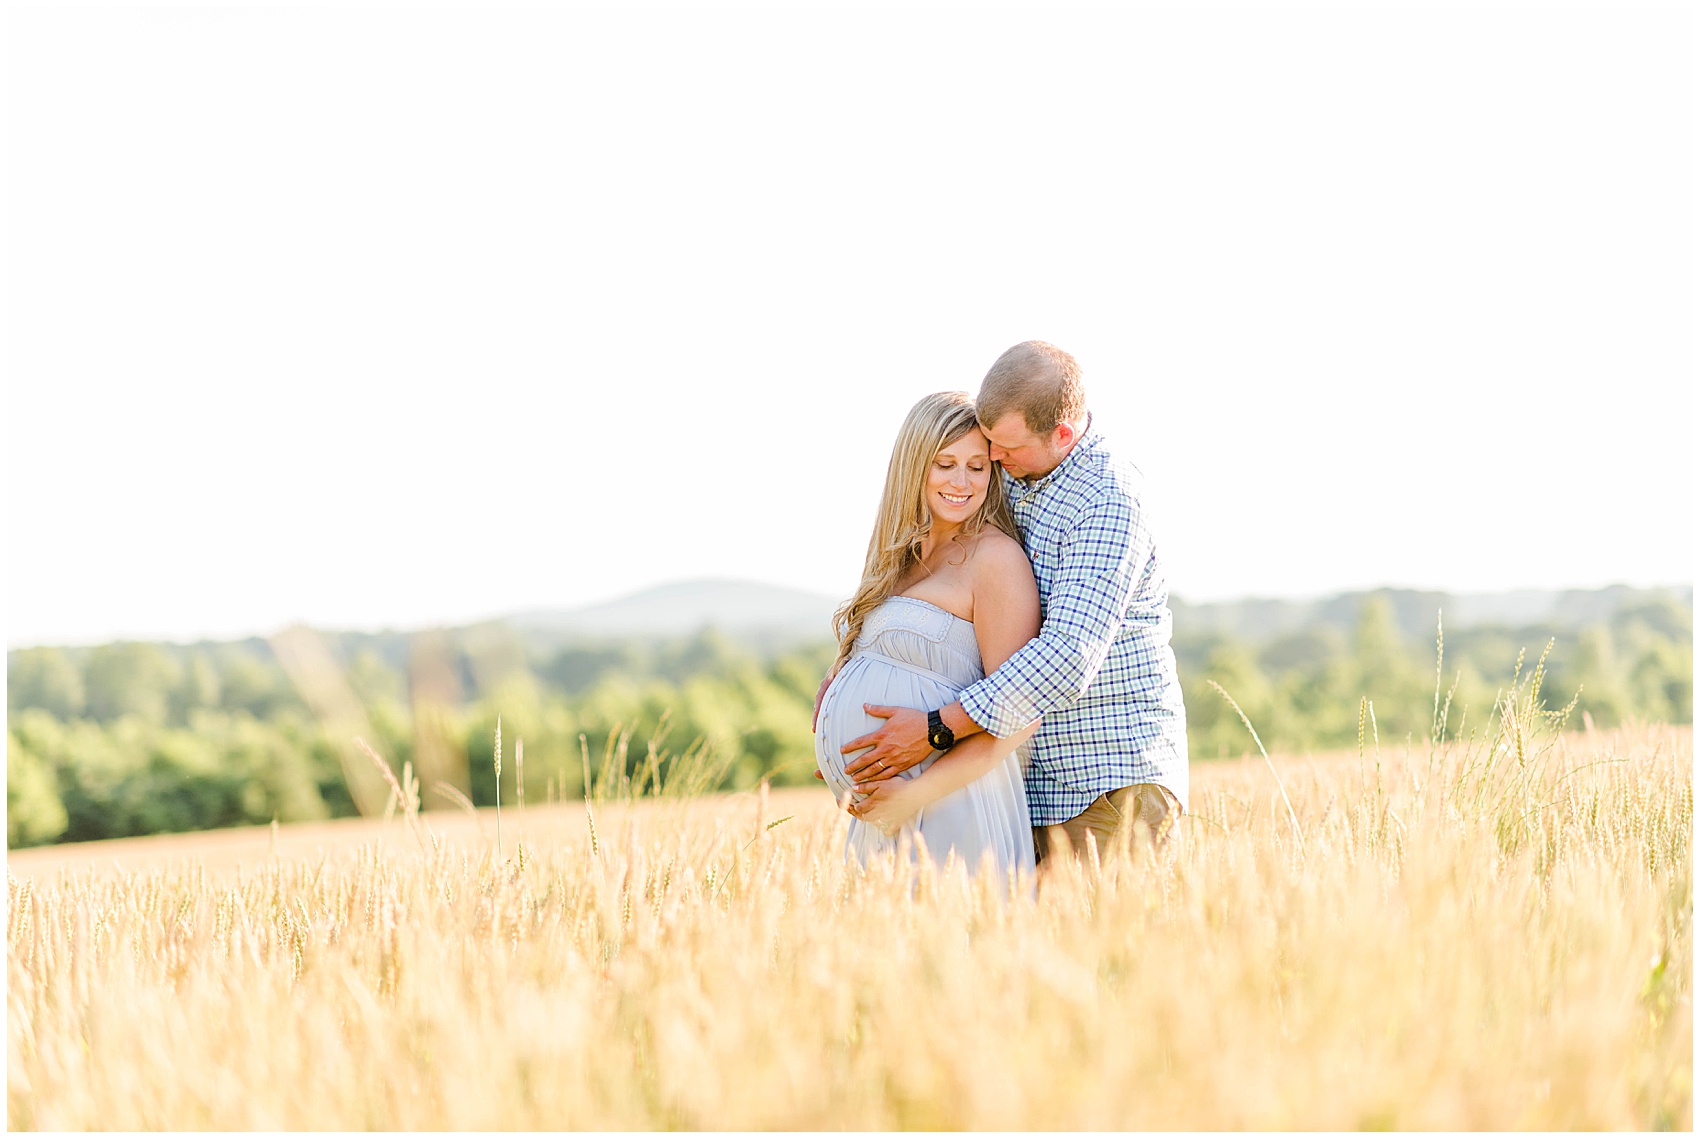 Harvest House and Catering Ramseur NC wheat field maternity session Charleston SC wedding Photographer_0245.jpg